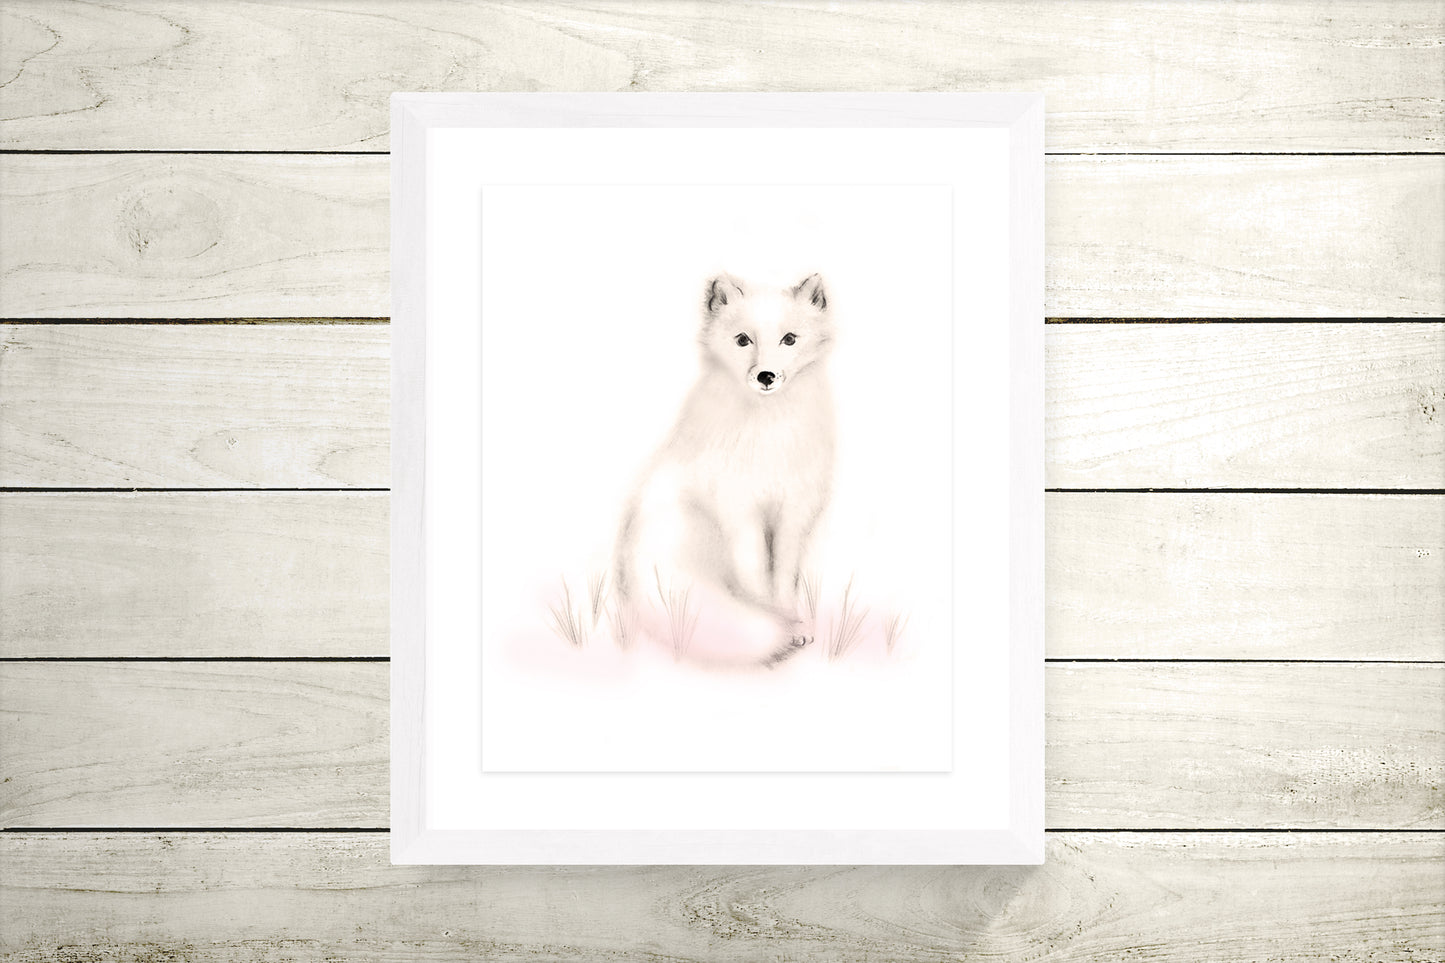 Drawing of an arctic snow fox in tones of sepia beige and blush pink on a plain, white background. The print is in a white wood frame with a white mount and is hung against a wood, shiplap backgroud. Studio Q - Art by Nicky Quartermaine Scott